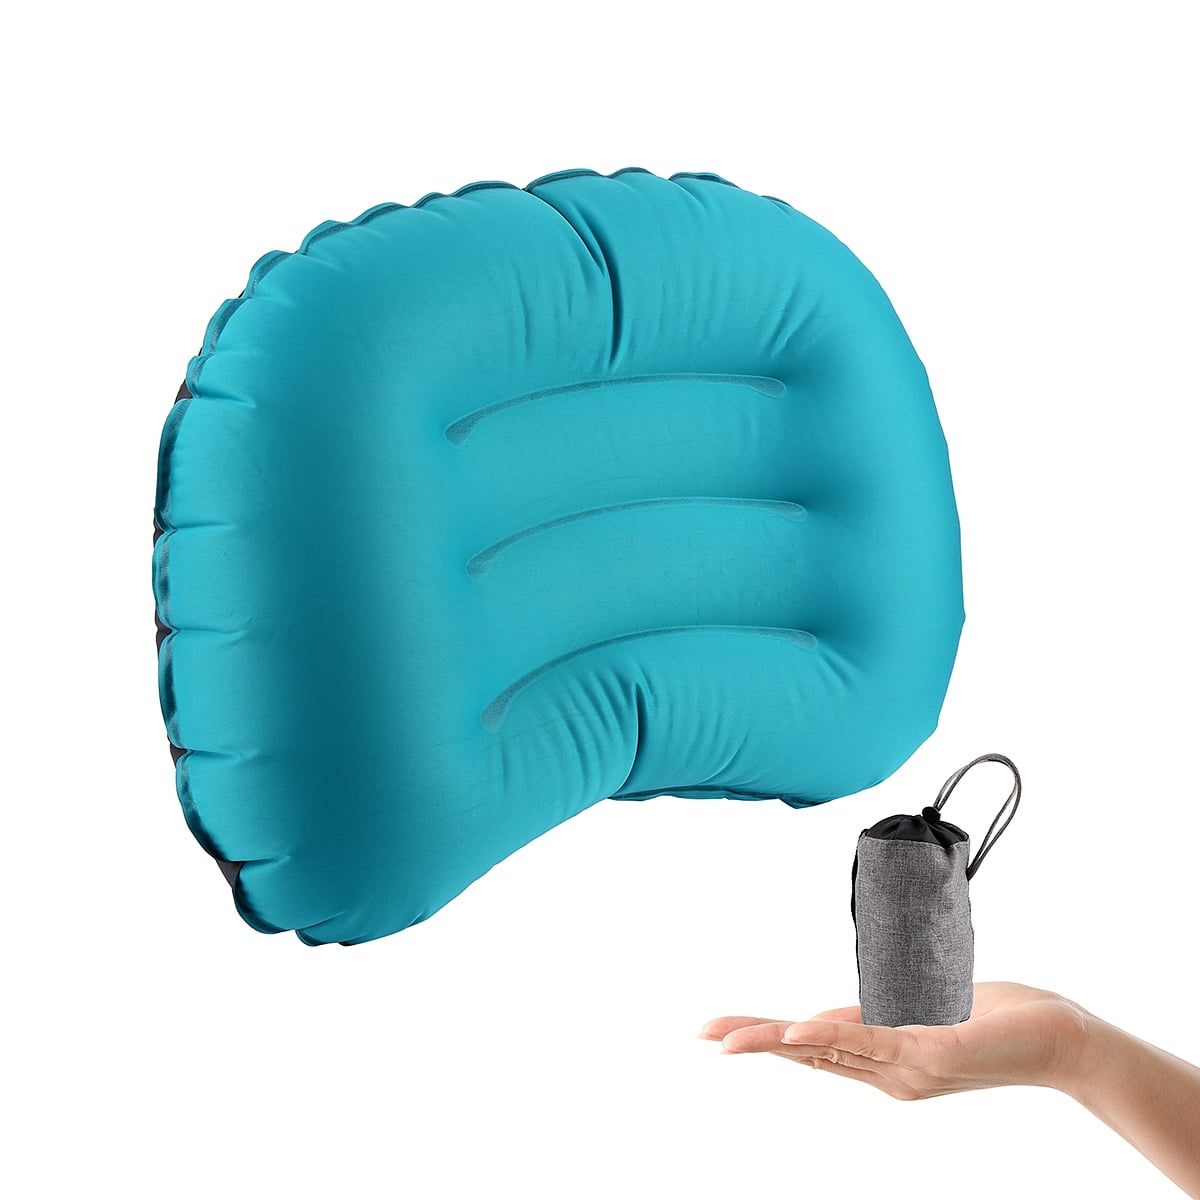 Topboutique - Ultra-light inflatable Pillow Peaceful sleeping Portable ...